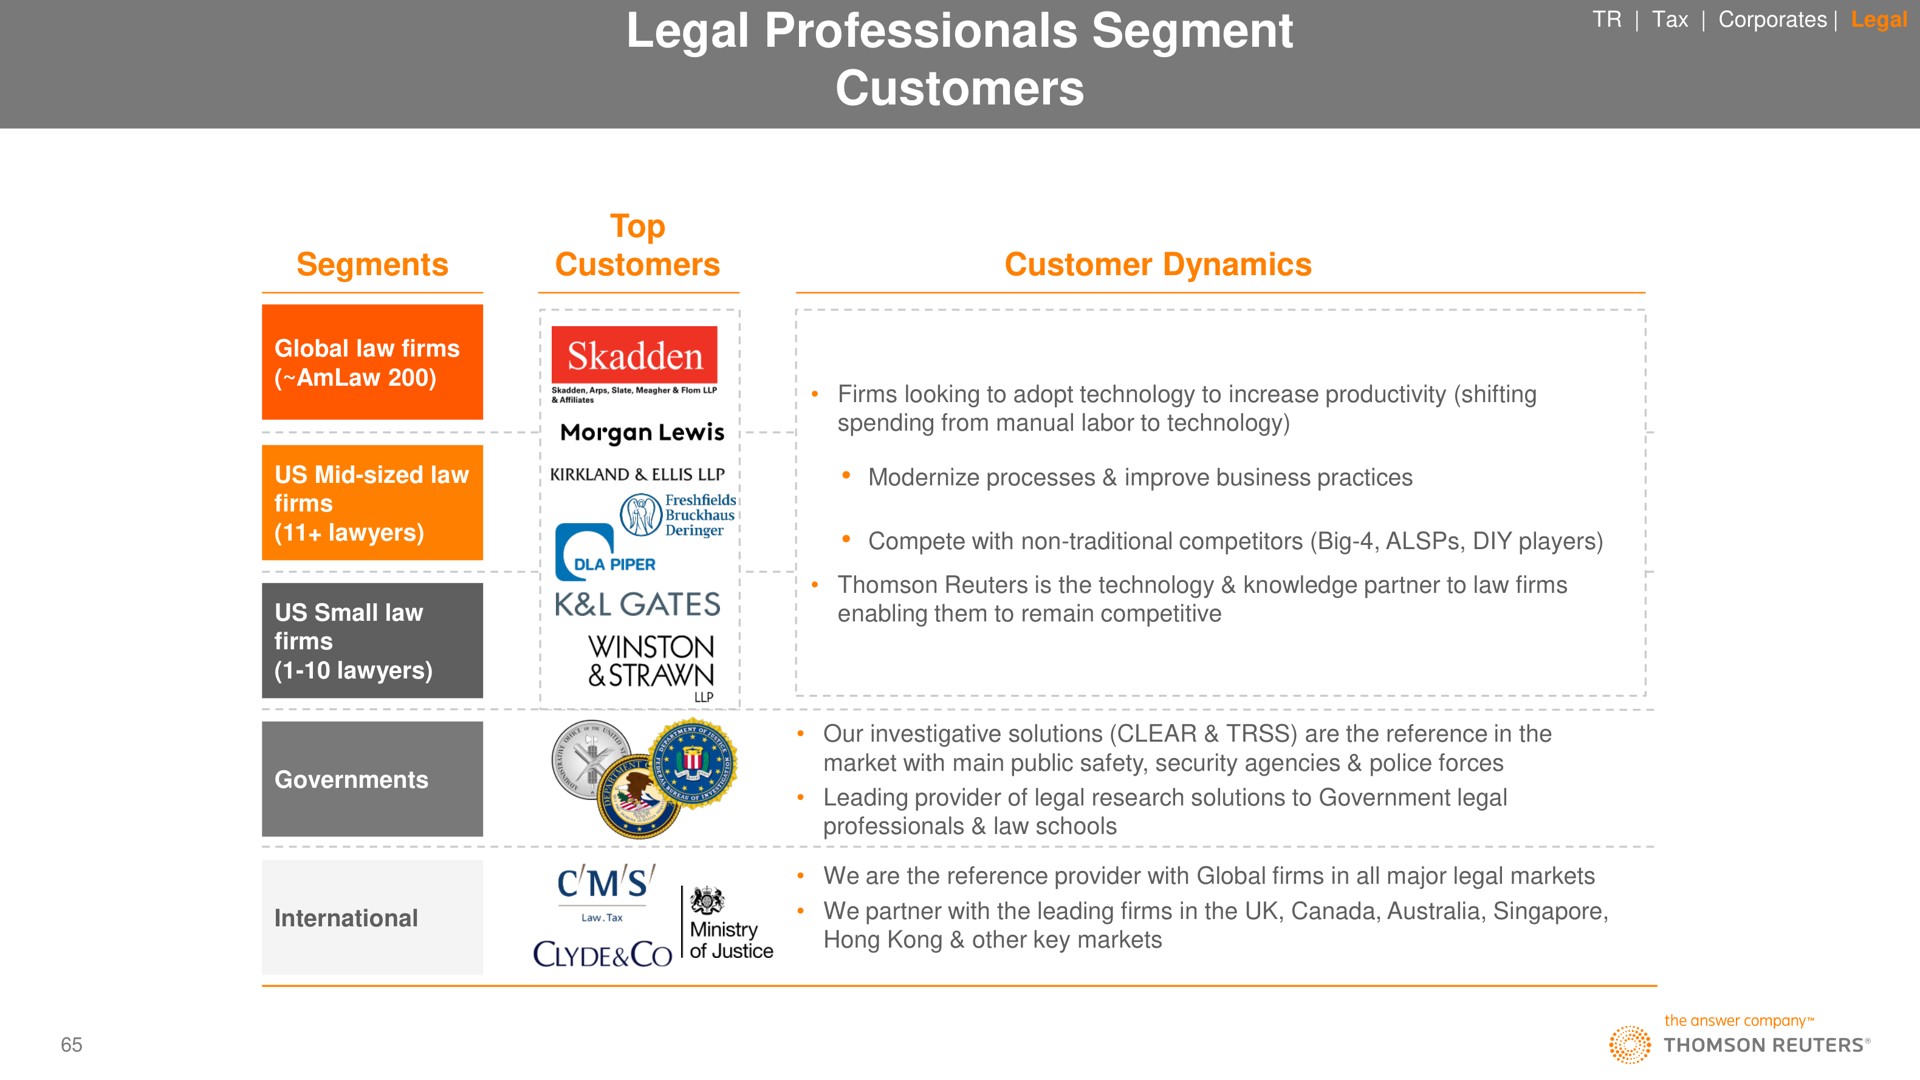 legal professionals segment customers peri a international with the leading firms in the canada | Thomson Reuters